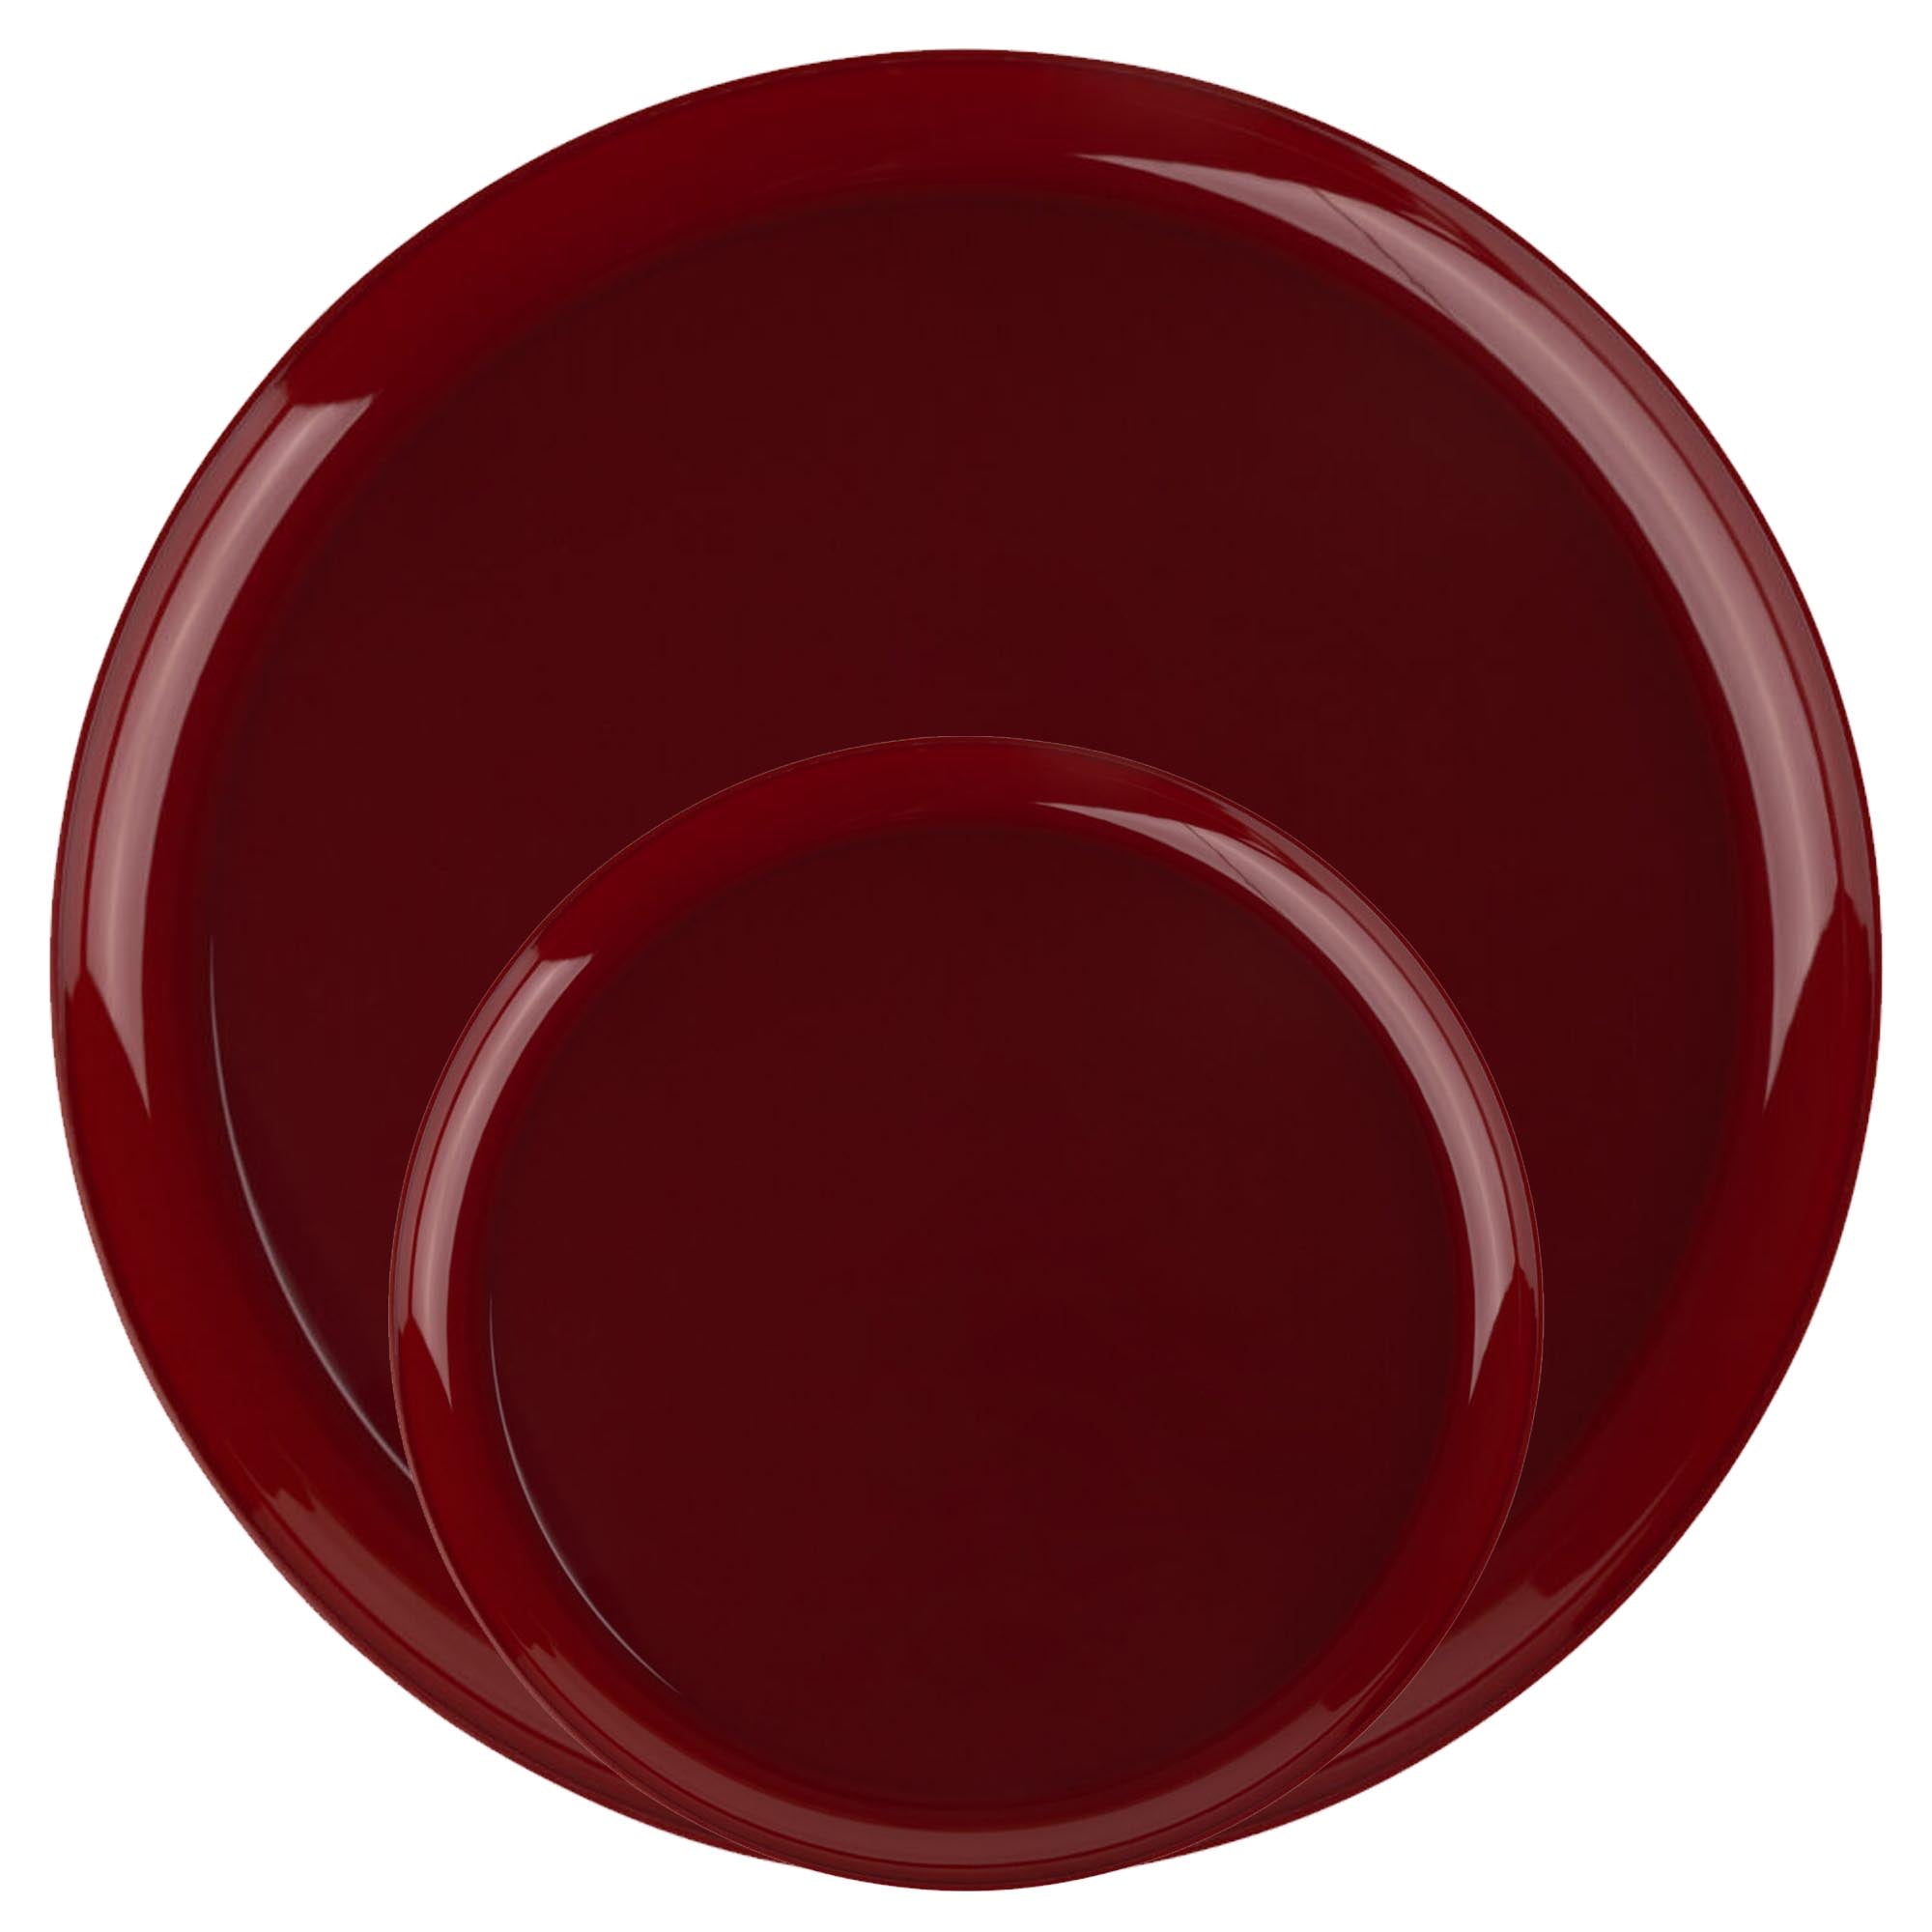 Plastic Tableware Cranberry Red Plates Edge Collection Dinner Party Set